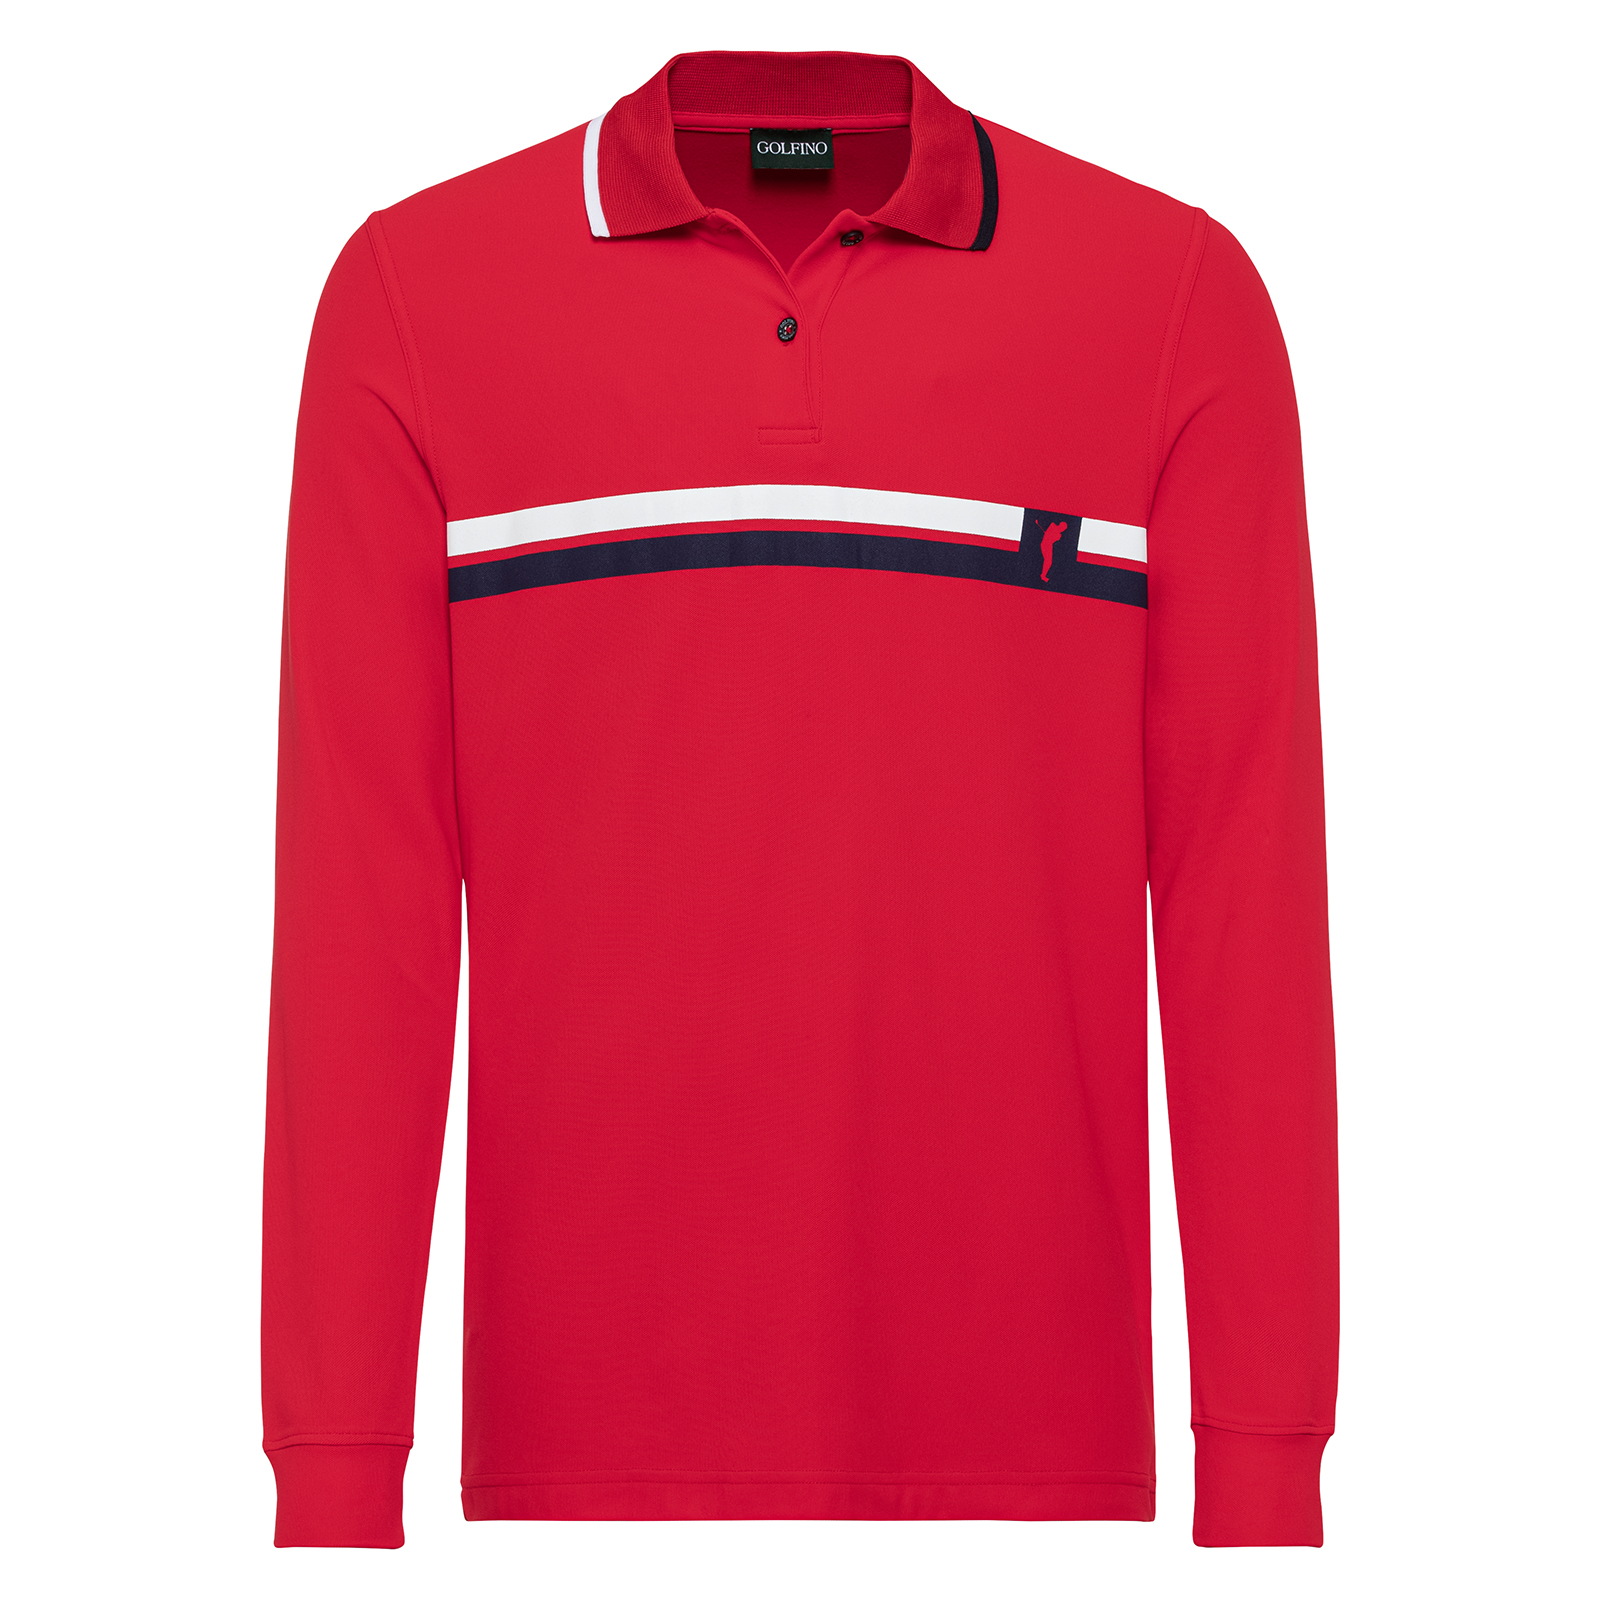 Men’s quick dry long-sleeved polo shirt 